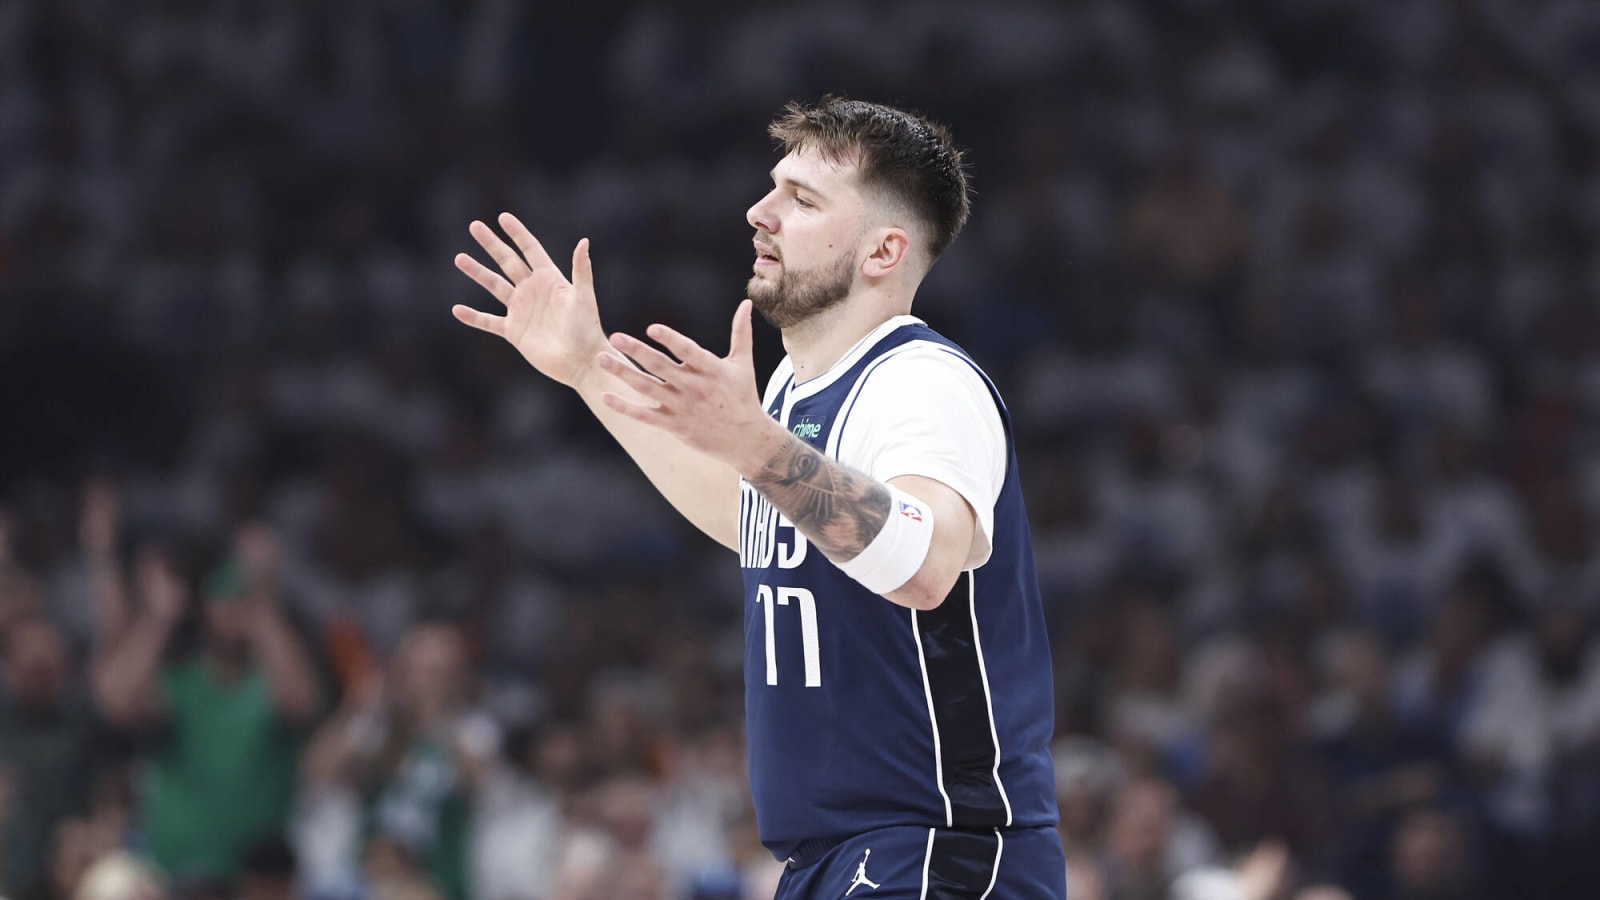 Watch: Luka Doncic stares in despair after OKC fan, from courtside, bizarrely throws ball away from him